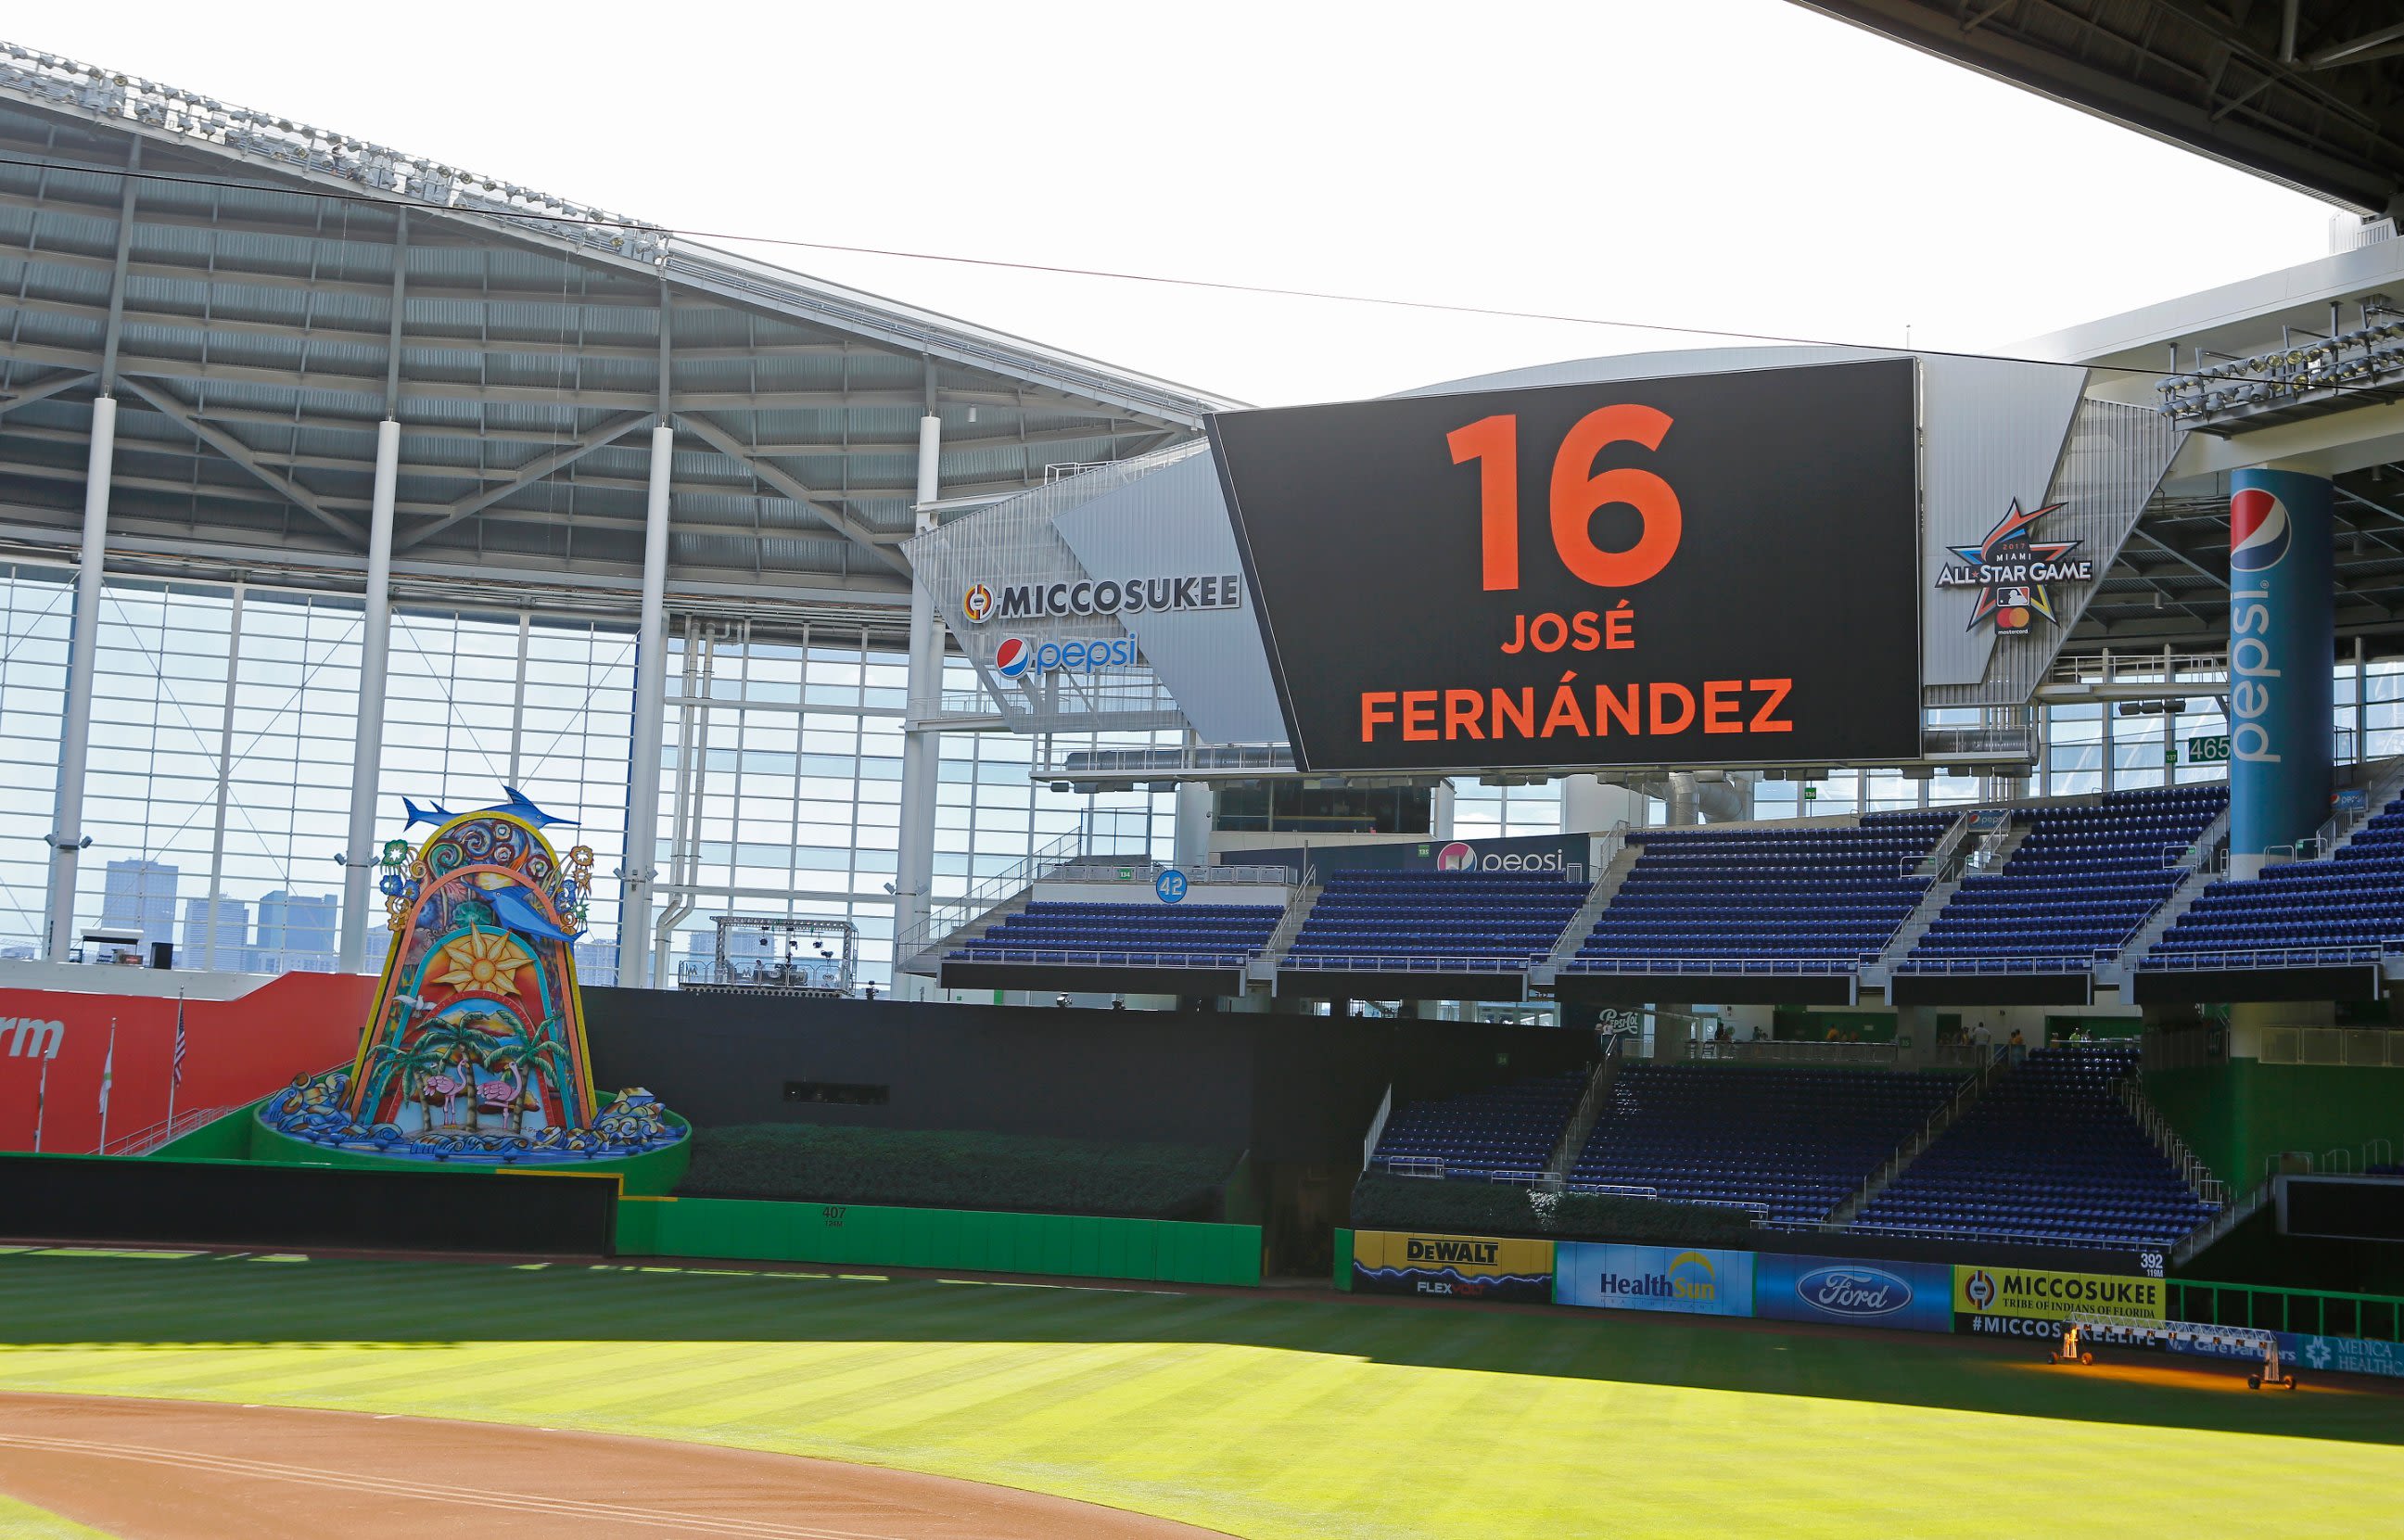 Remembering Late Marlins Pitcher Jose Fernandez A Year After His